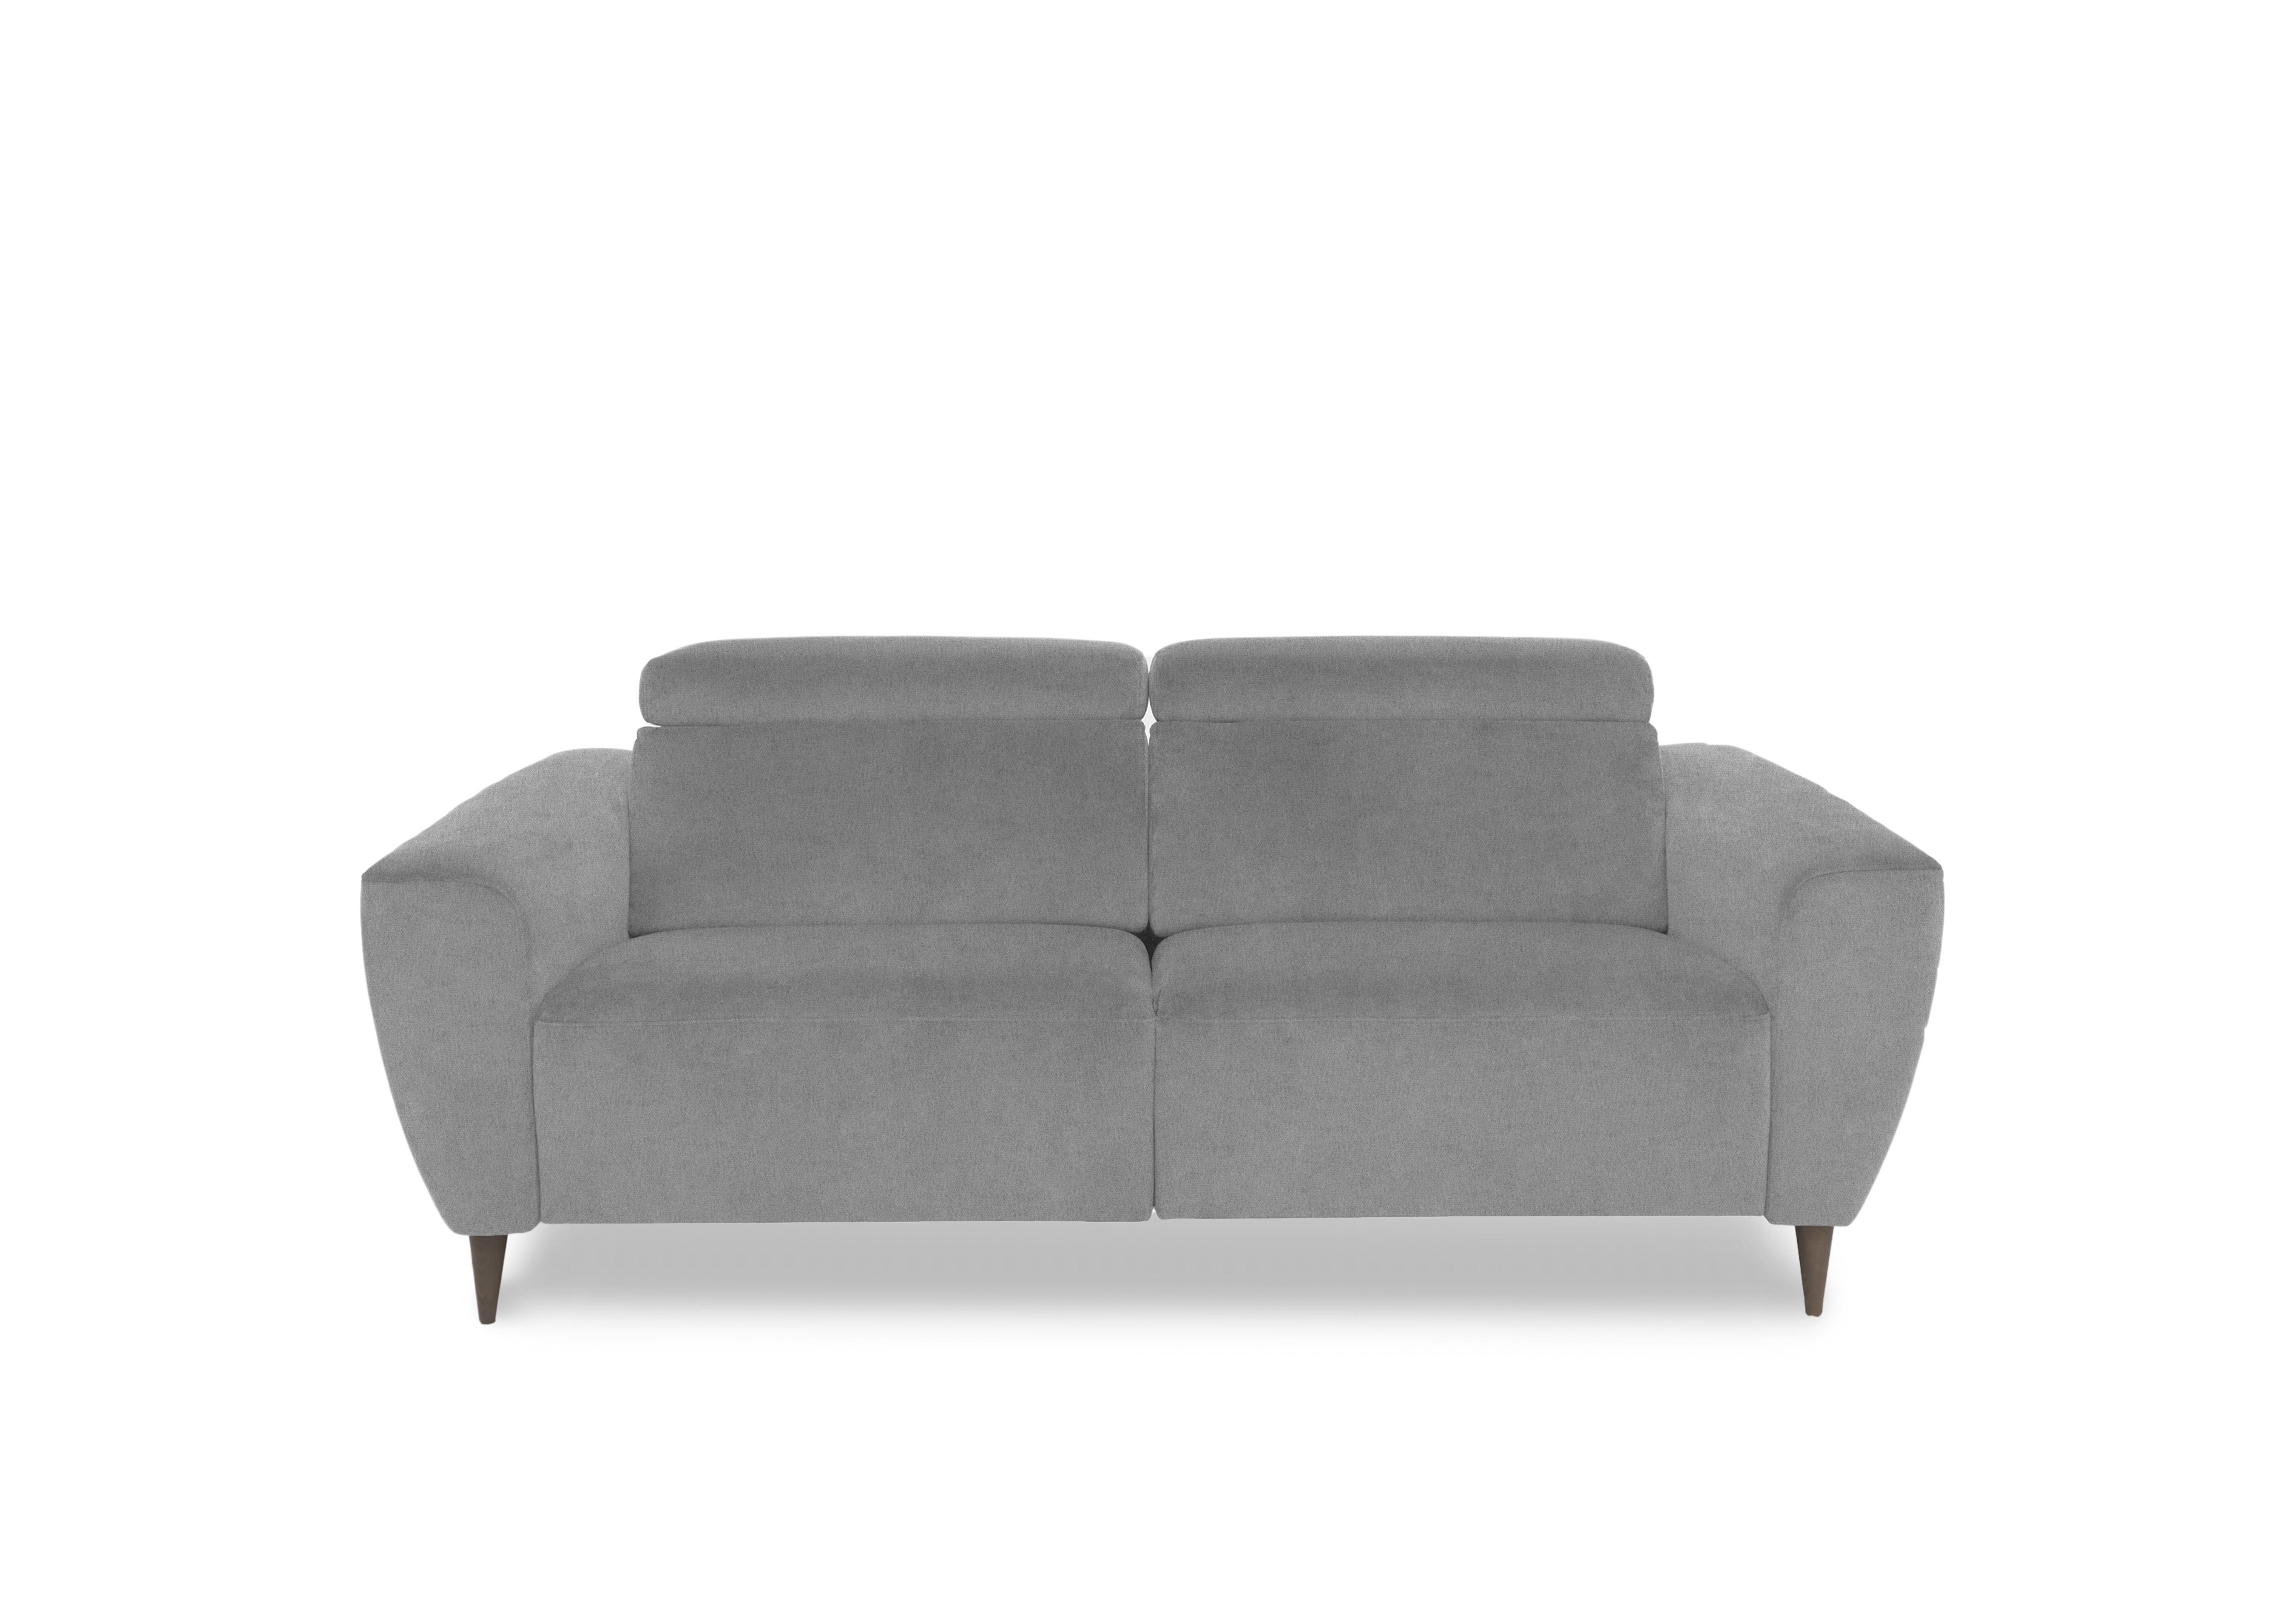 Milano 2.5 Seater Fabric Sofa in Fuente Ash To Ft on Furniture Village